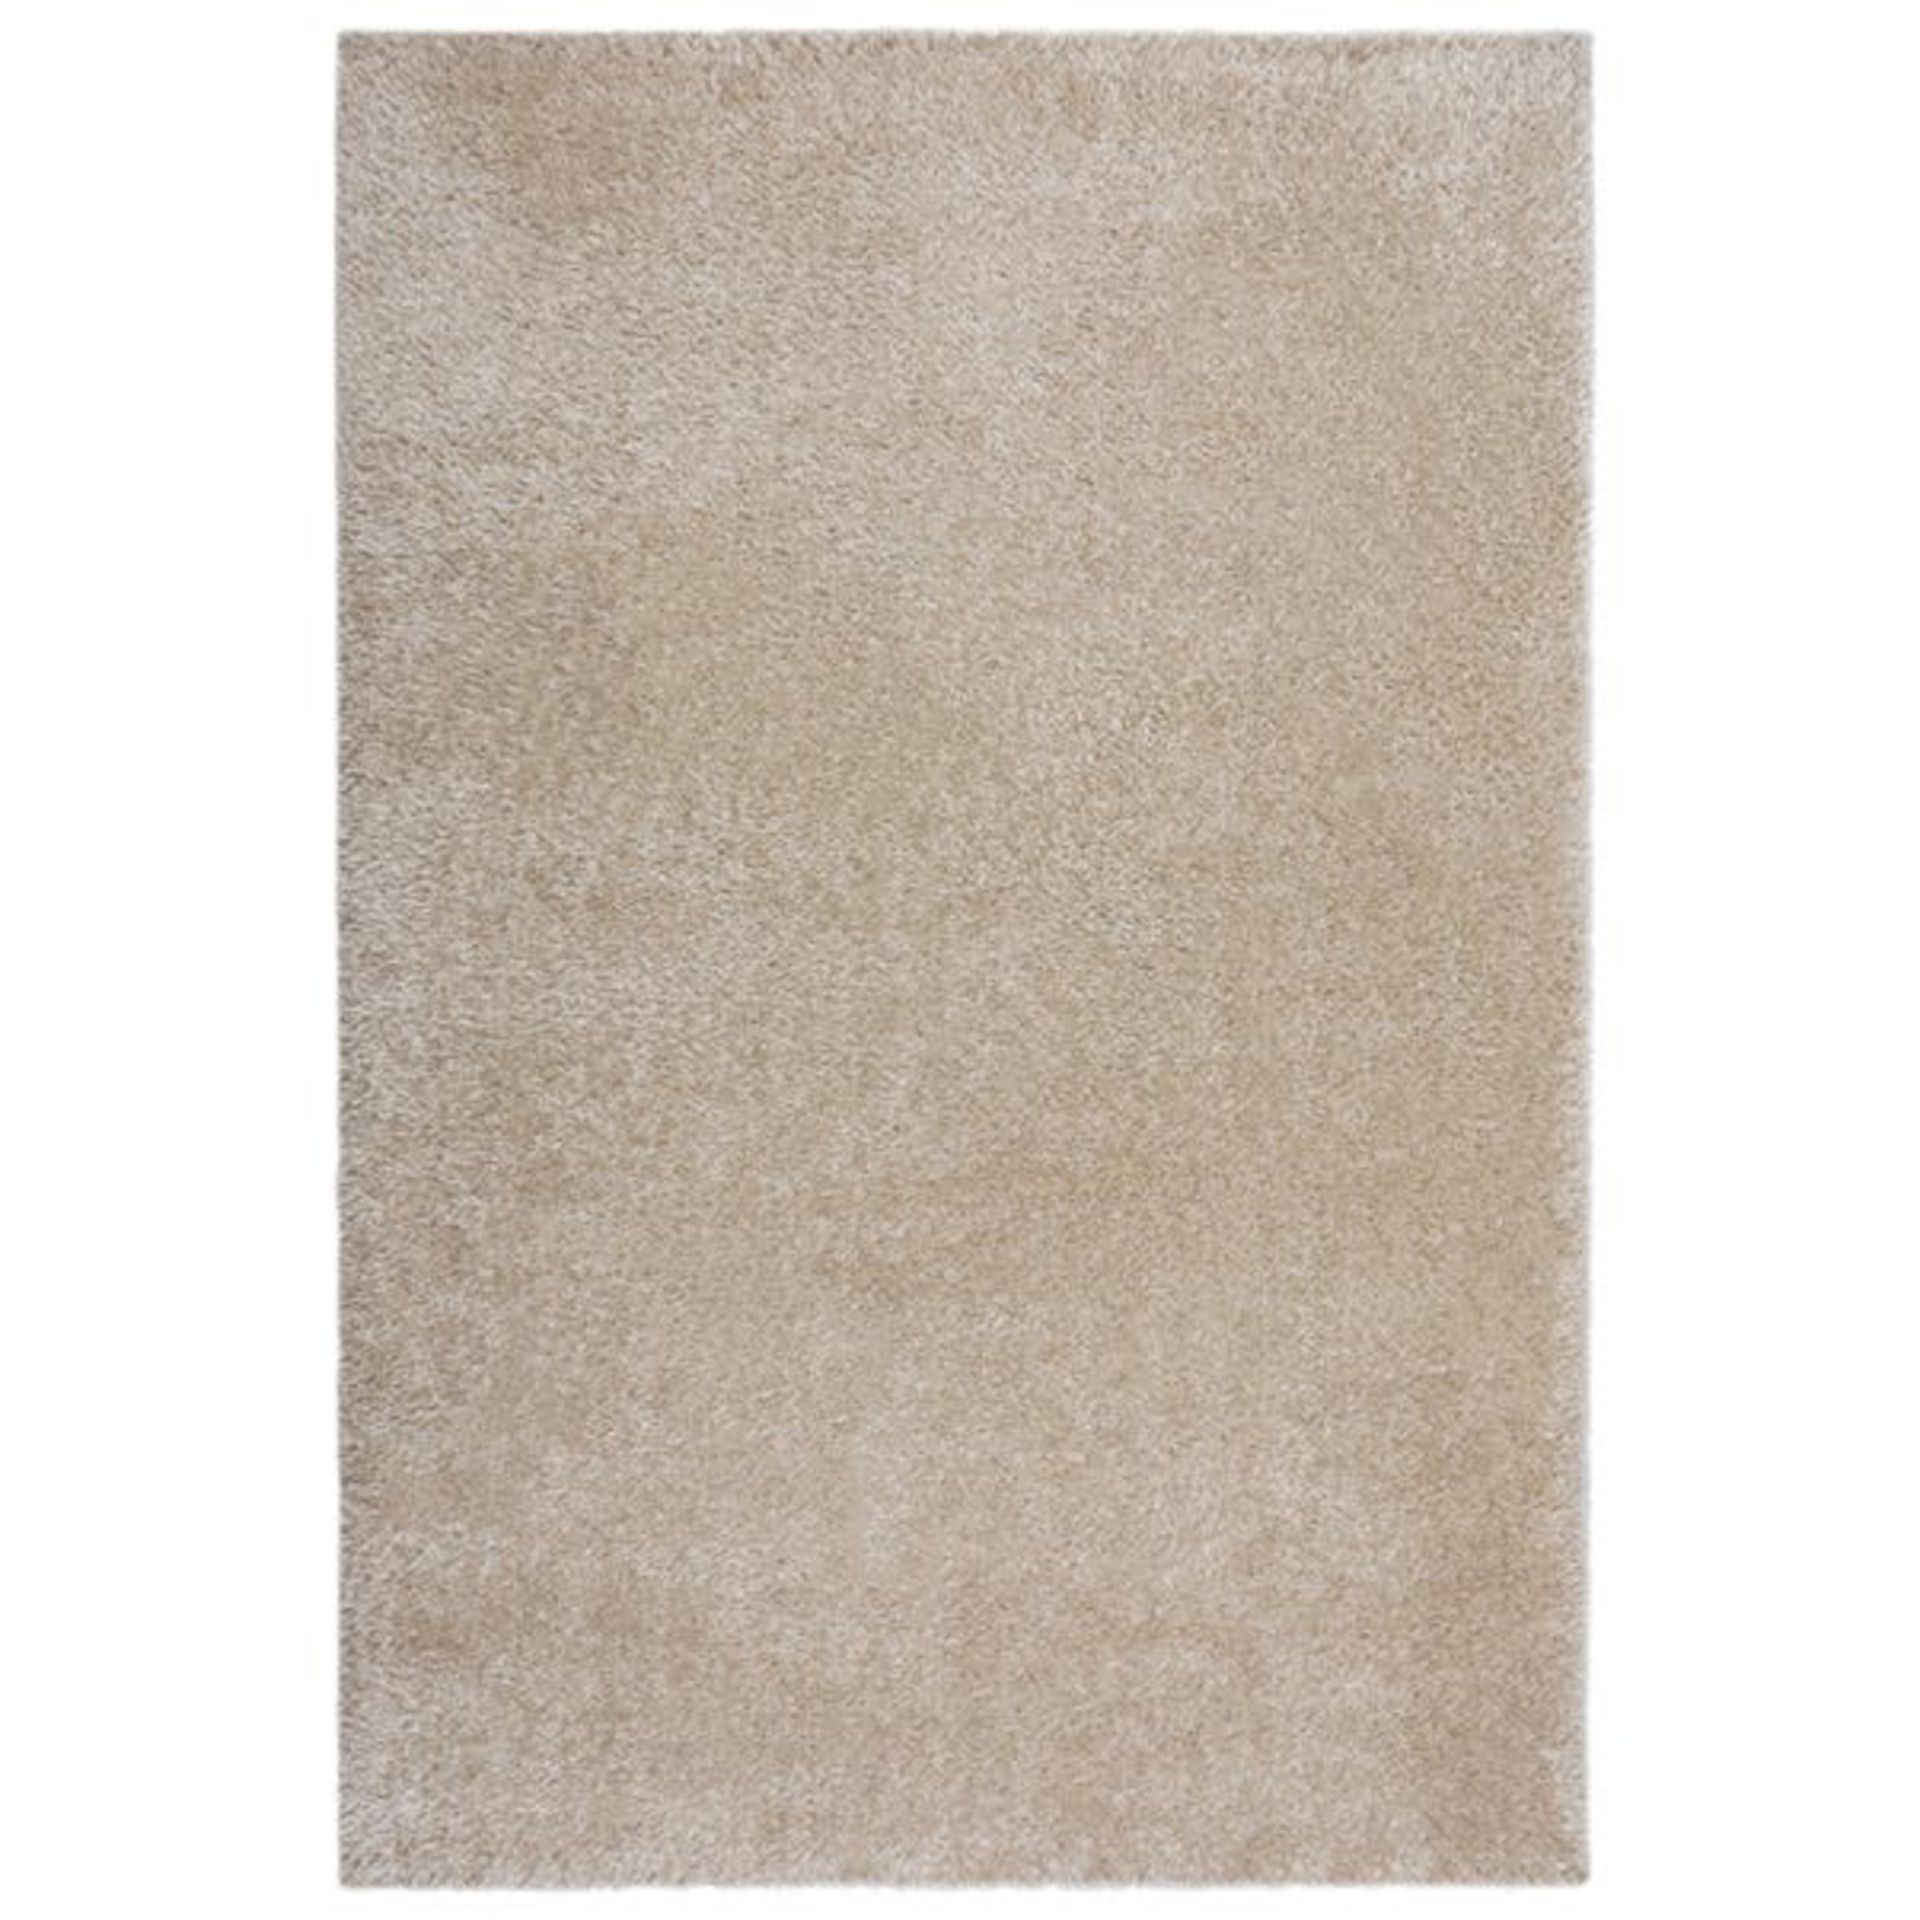 Indulgence D040 Indulgence Rug In Champagne 200X290Cm RRP 199 About the Product(s) Range: INDULGENCE